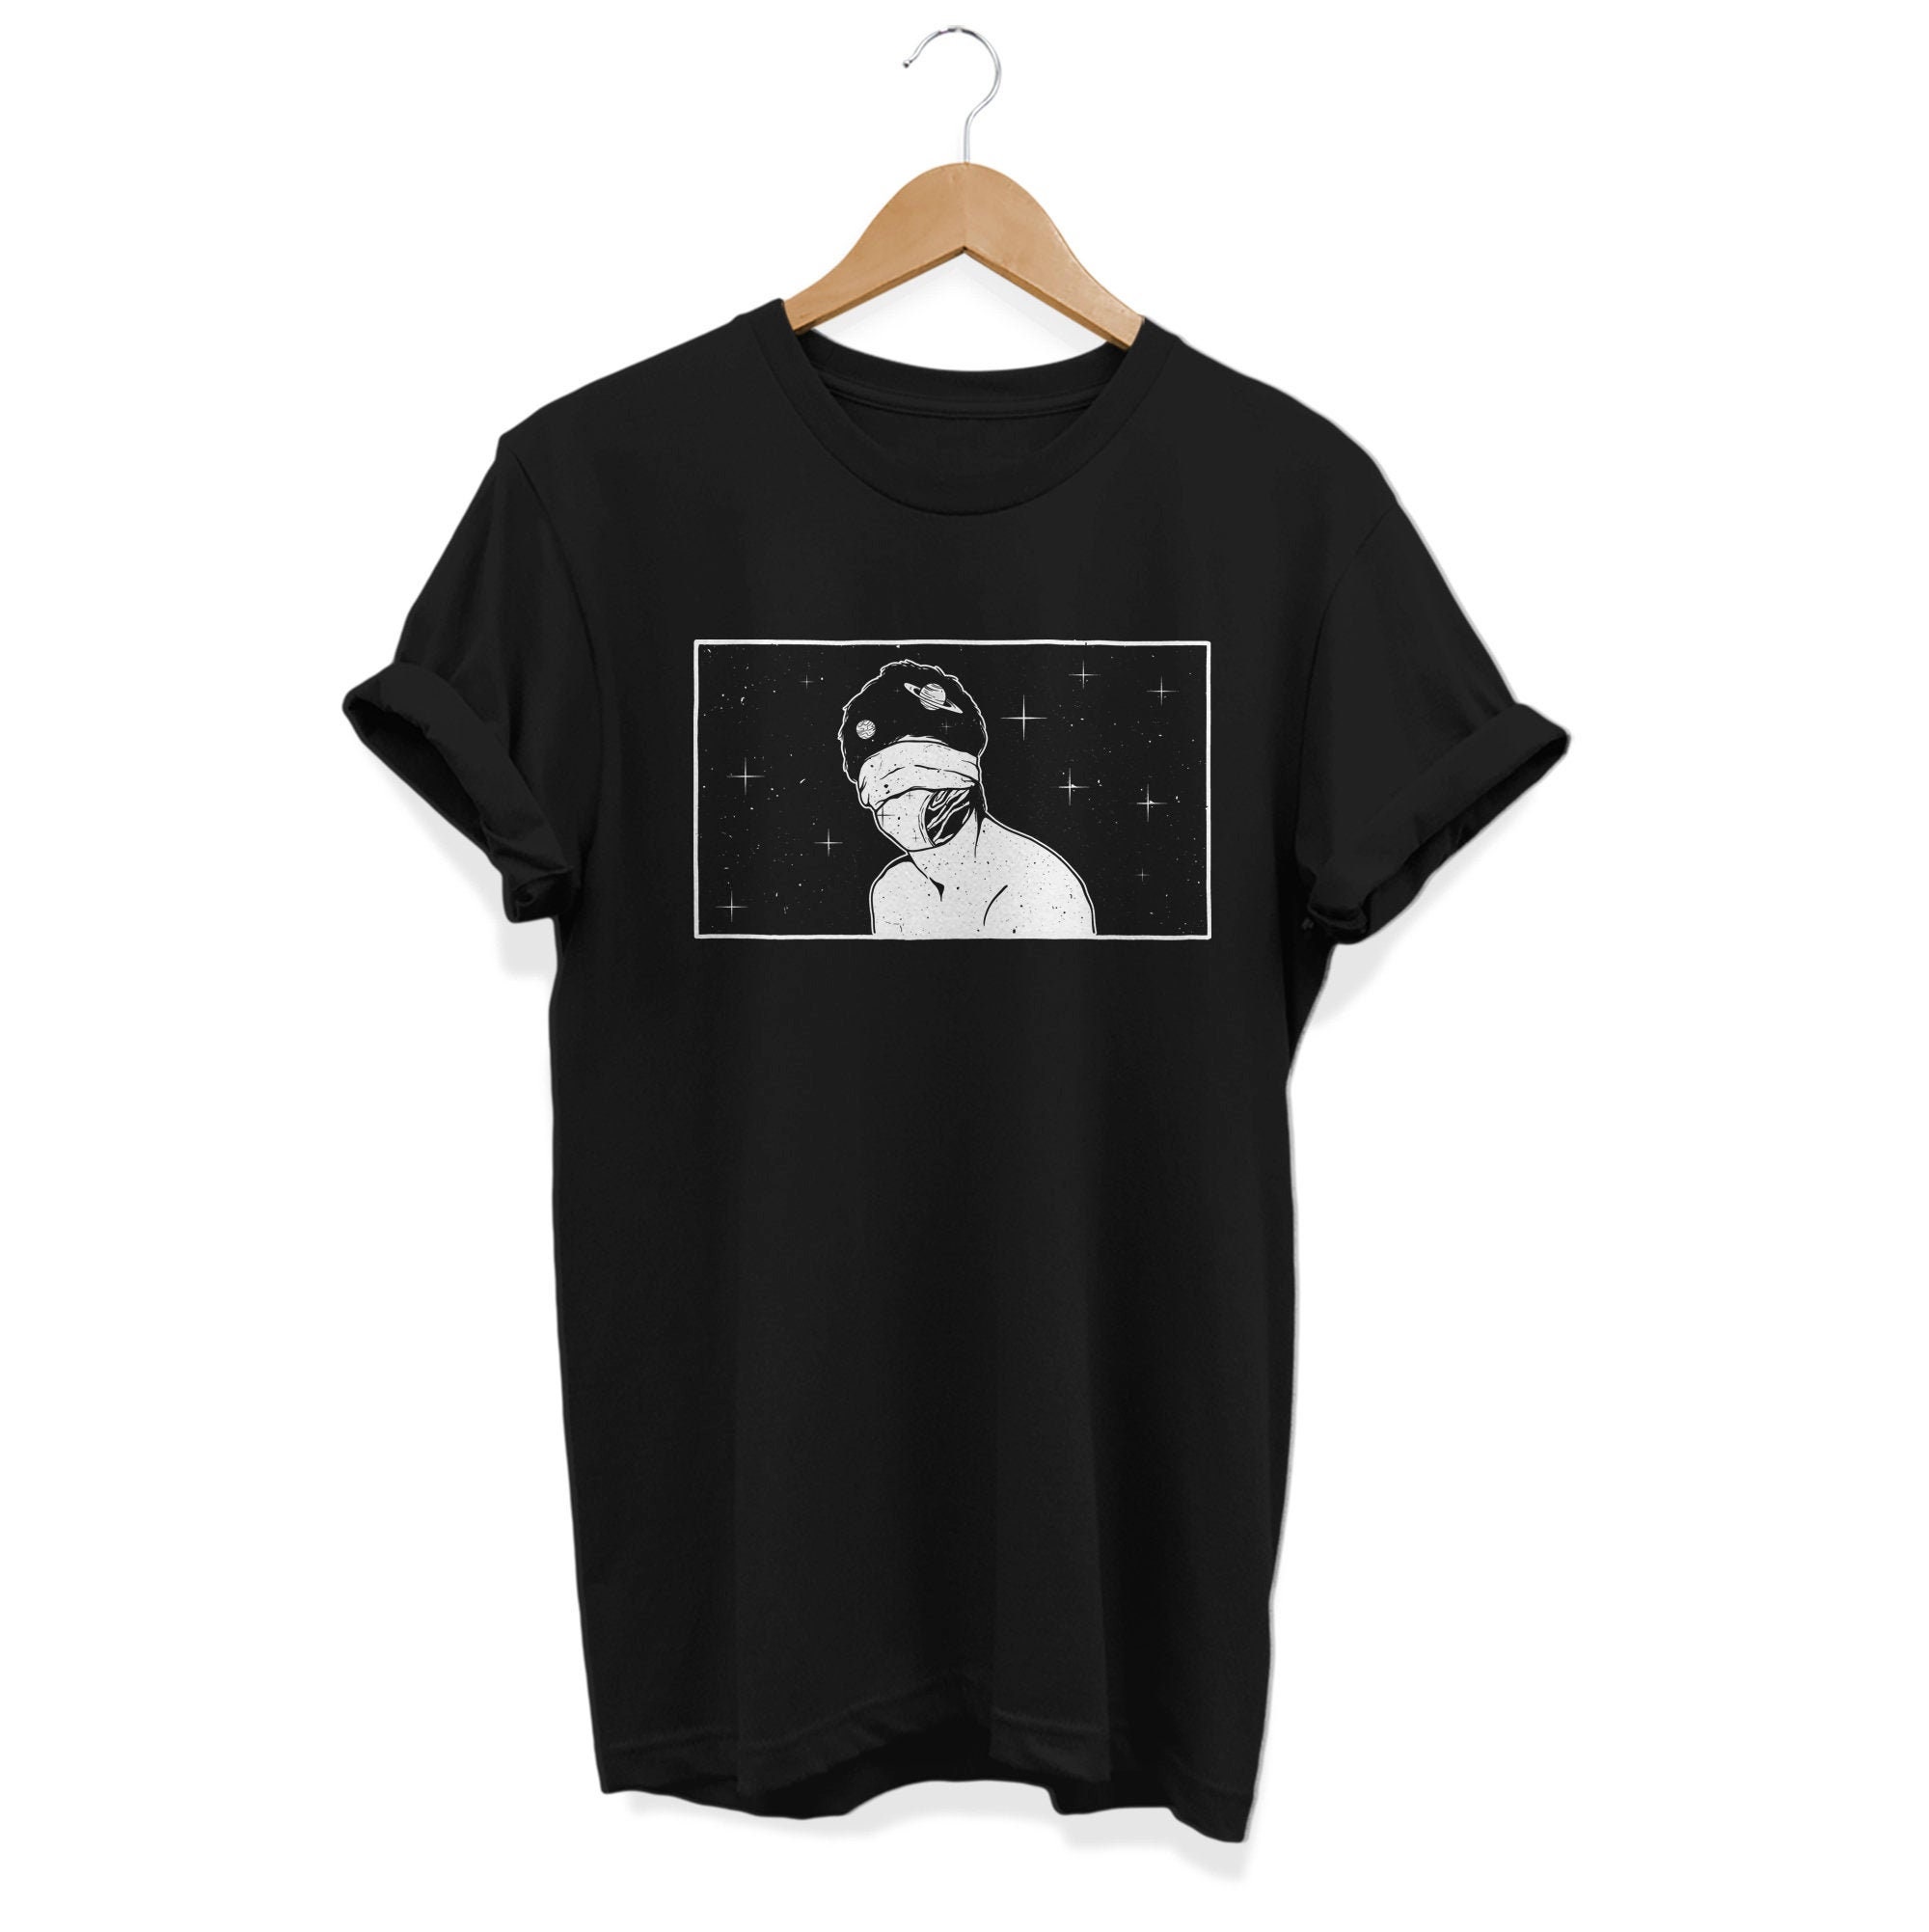 aesthetic t shirts roblox - Buy aesthetic t shirts roblox at Best Price in  Malaysia